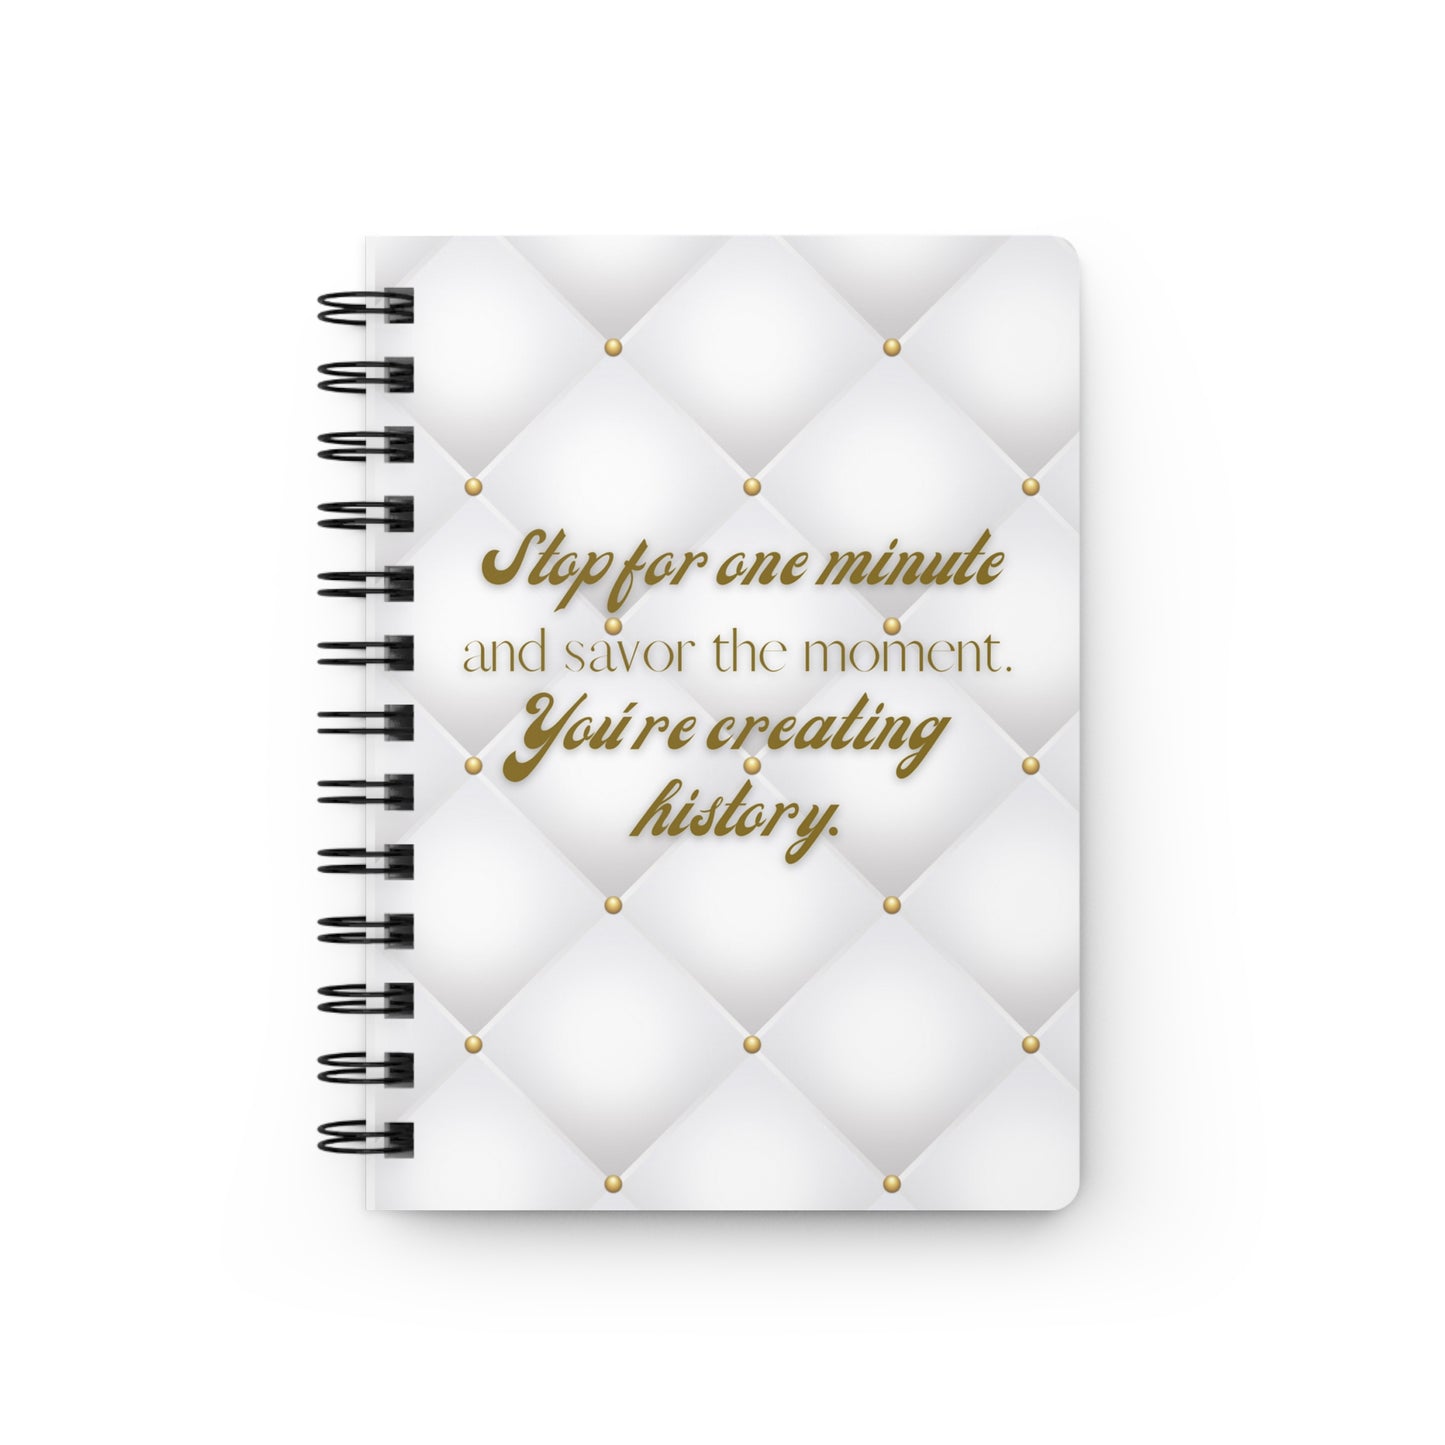 Stop for one minute Tufted Print White and Gold Spiral Bound Journal